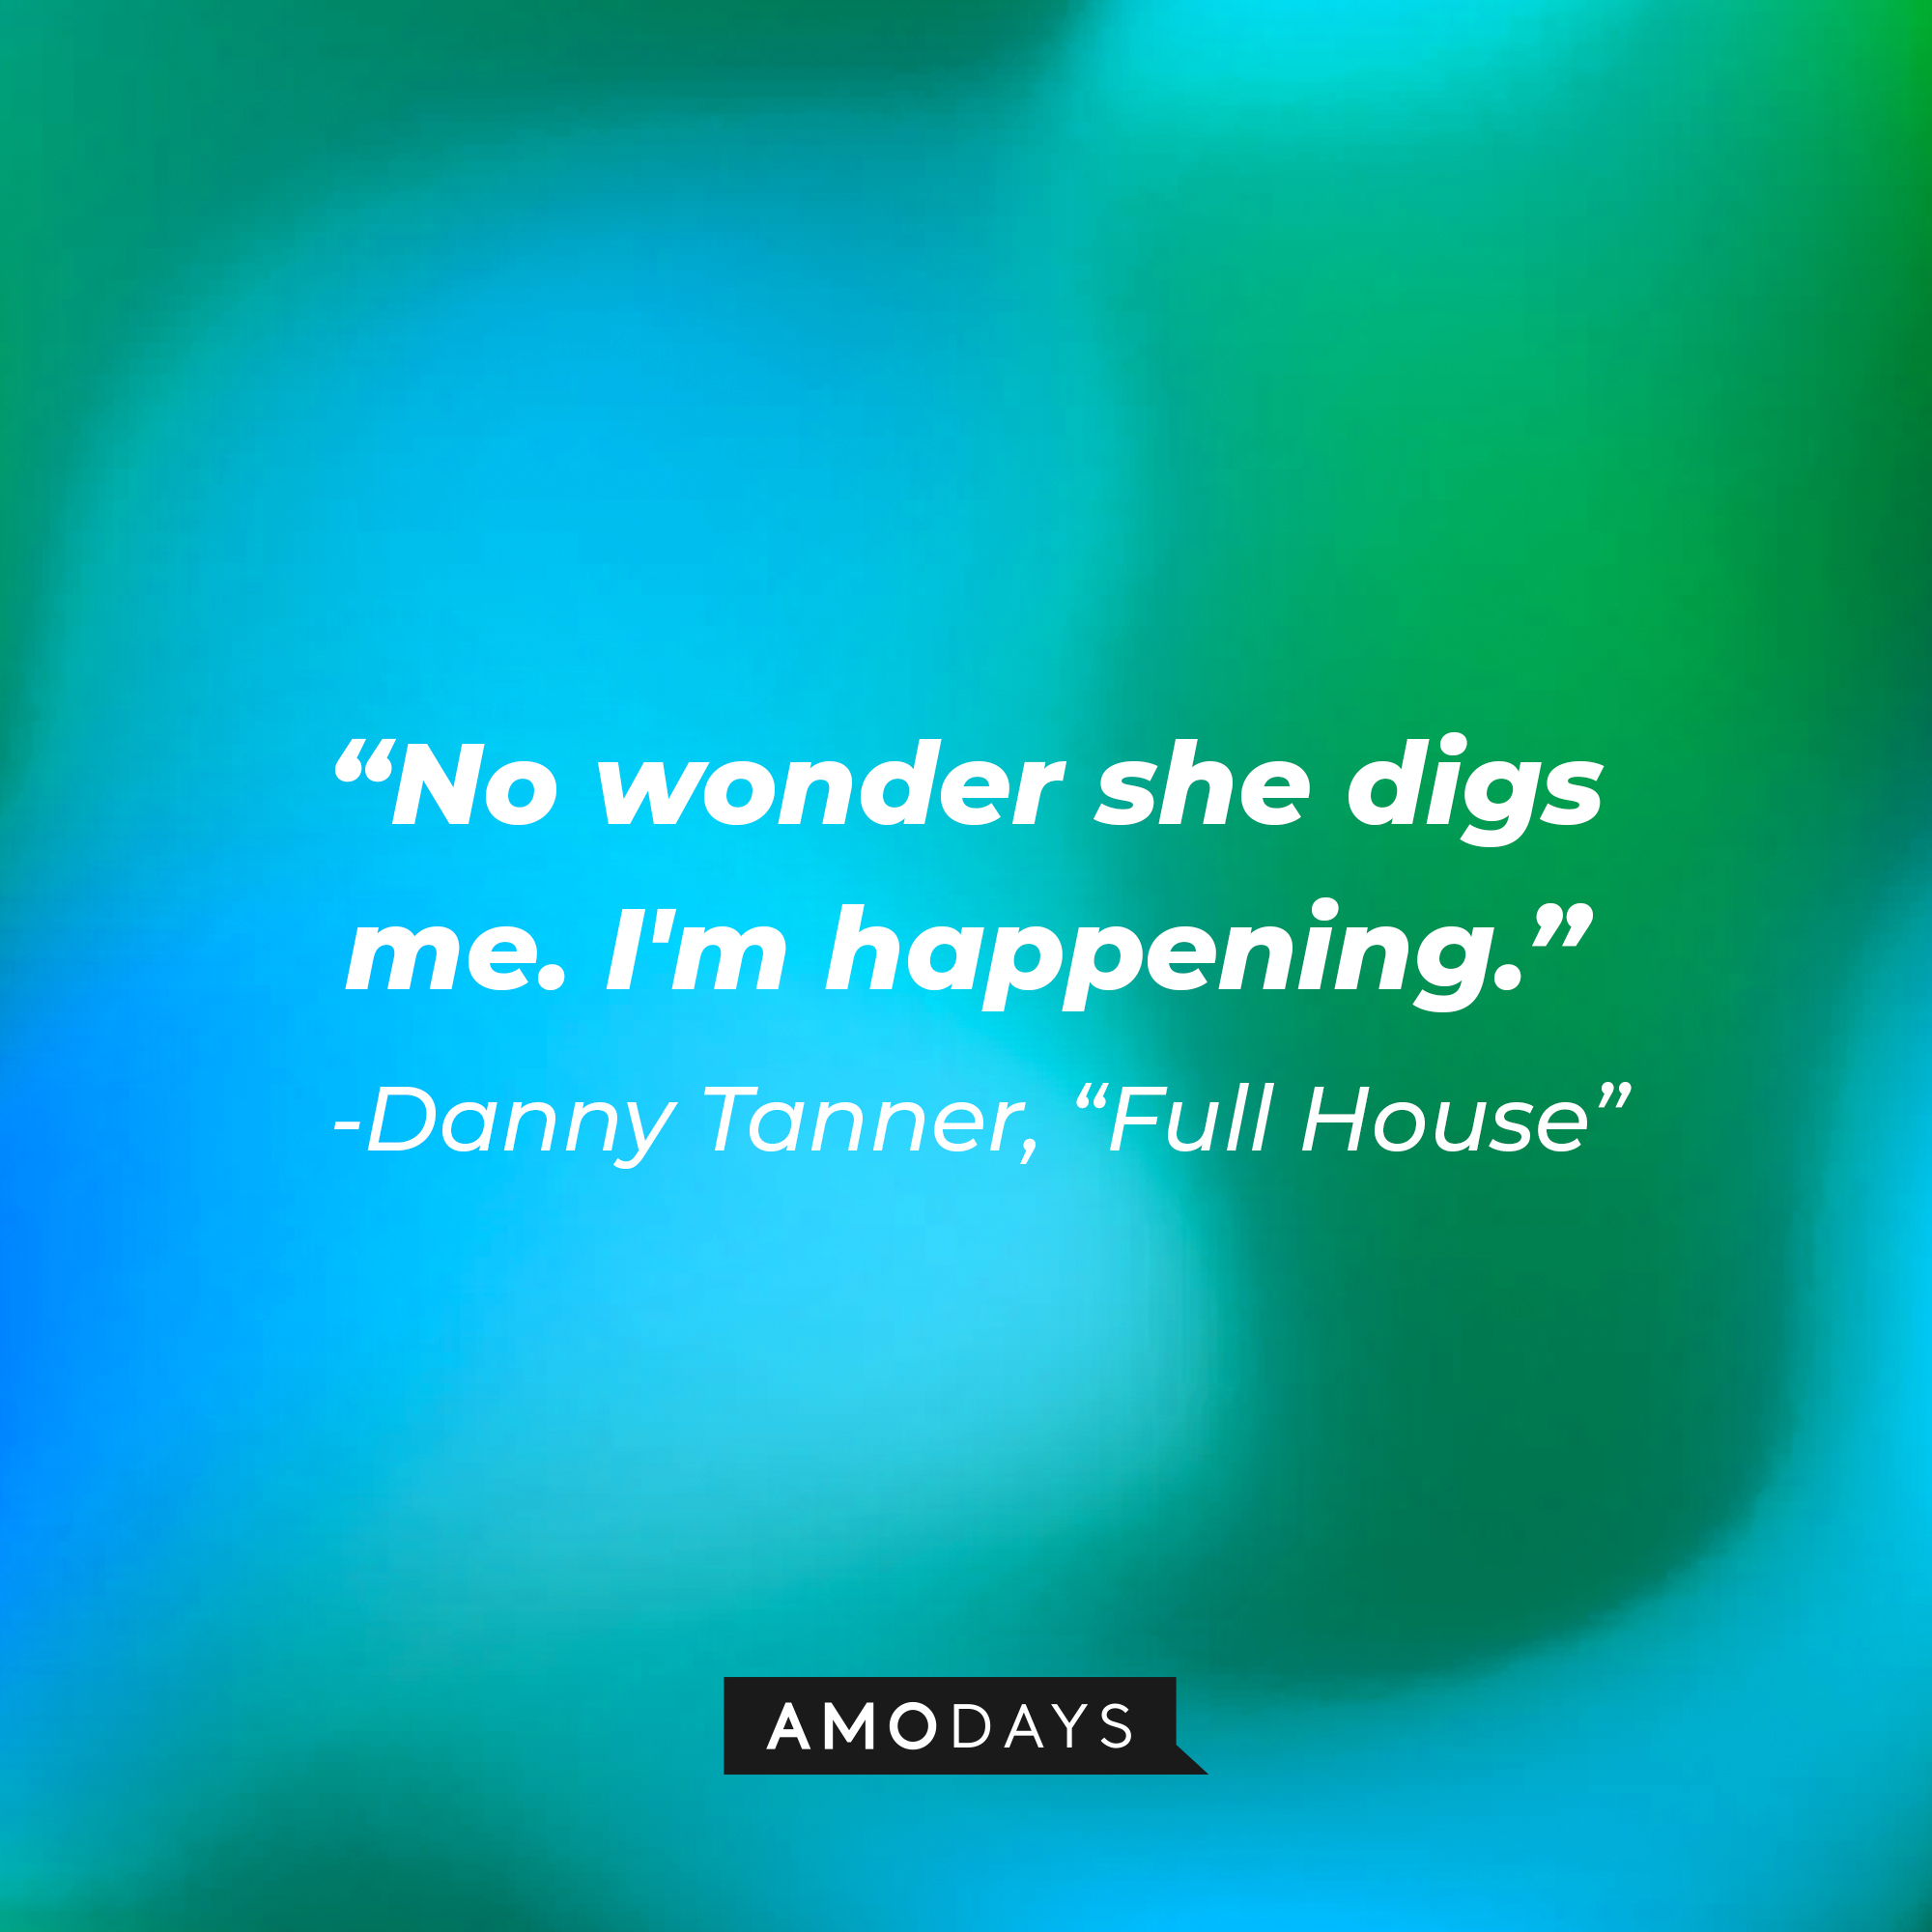 Danny Tanner's quote from "Full House" : "No wonder she digs me. I'm happening" | Source: facebook.com/FullHouseTVshow